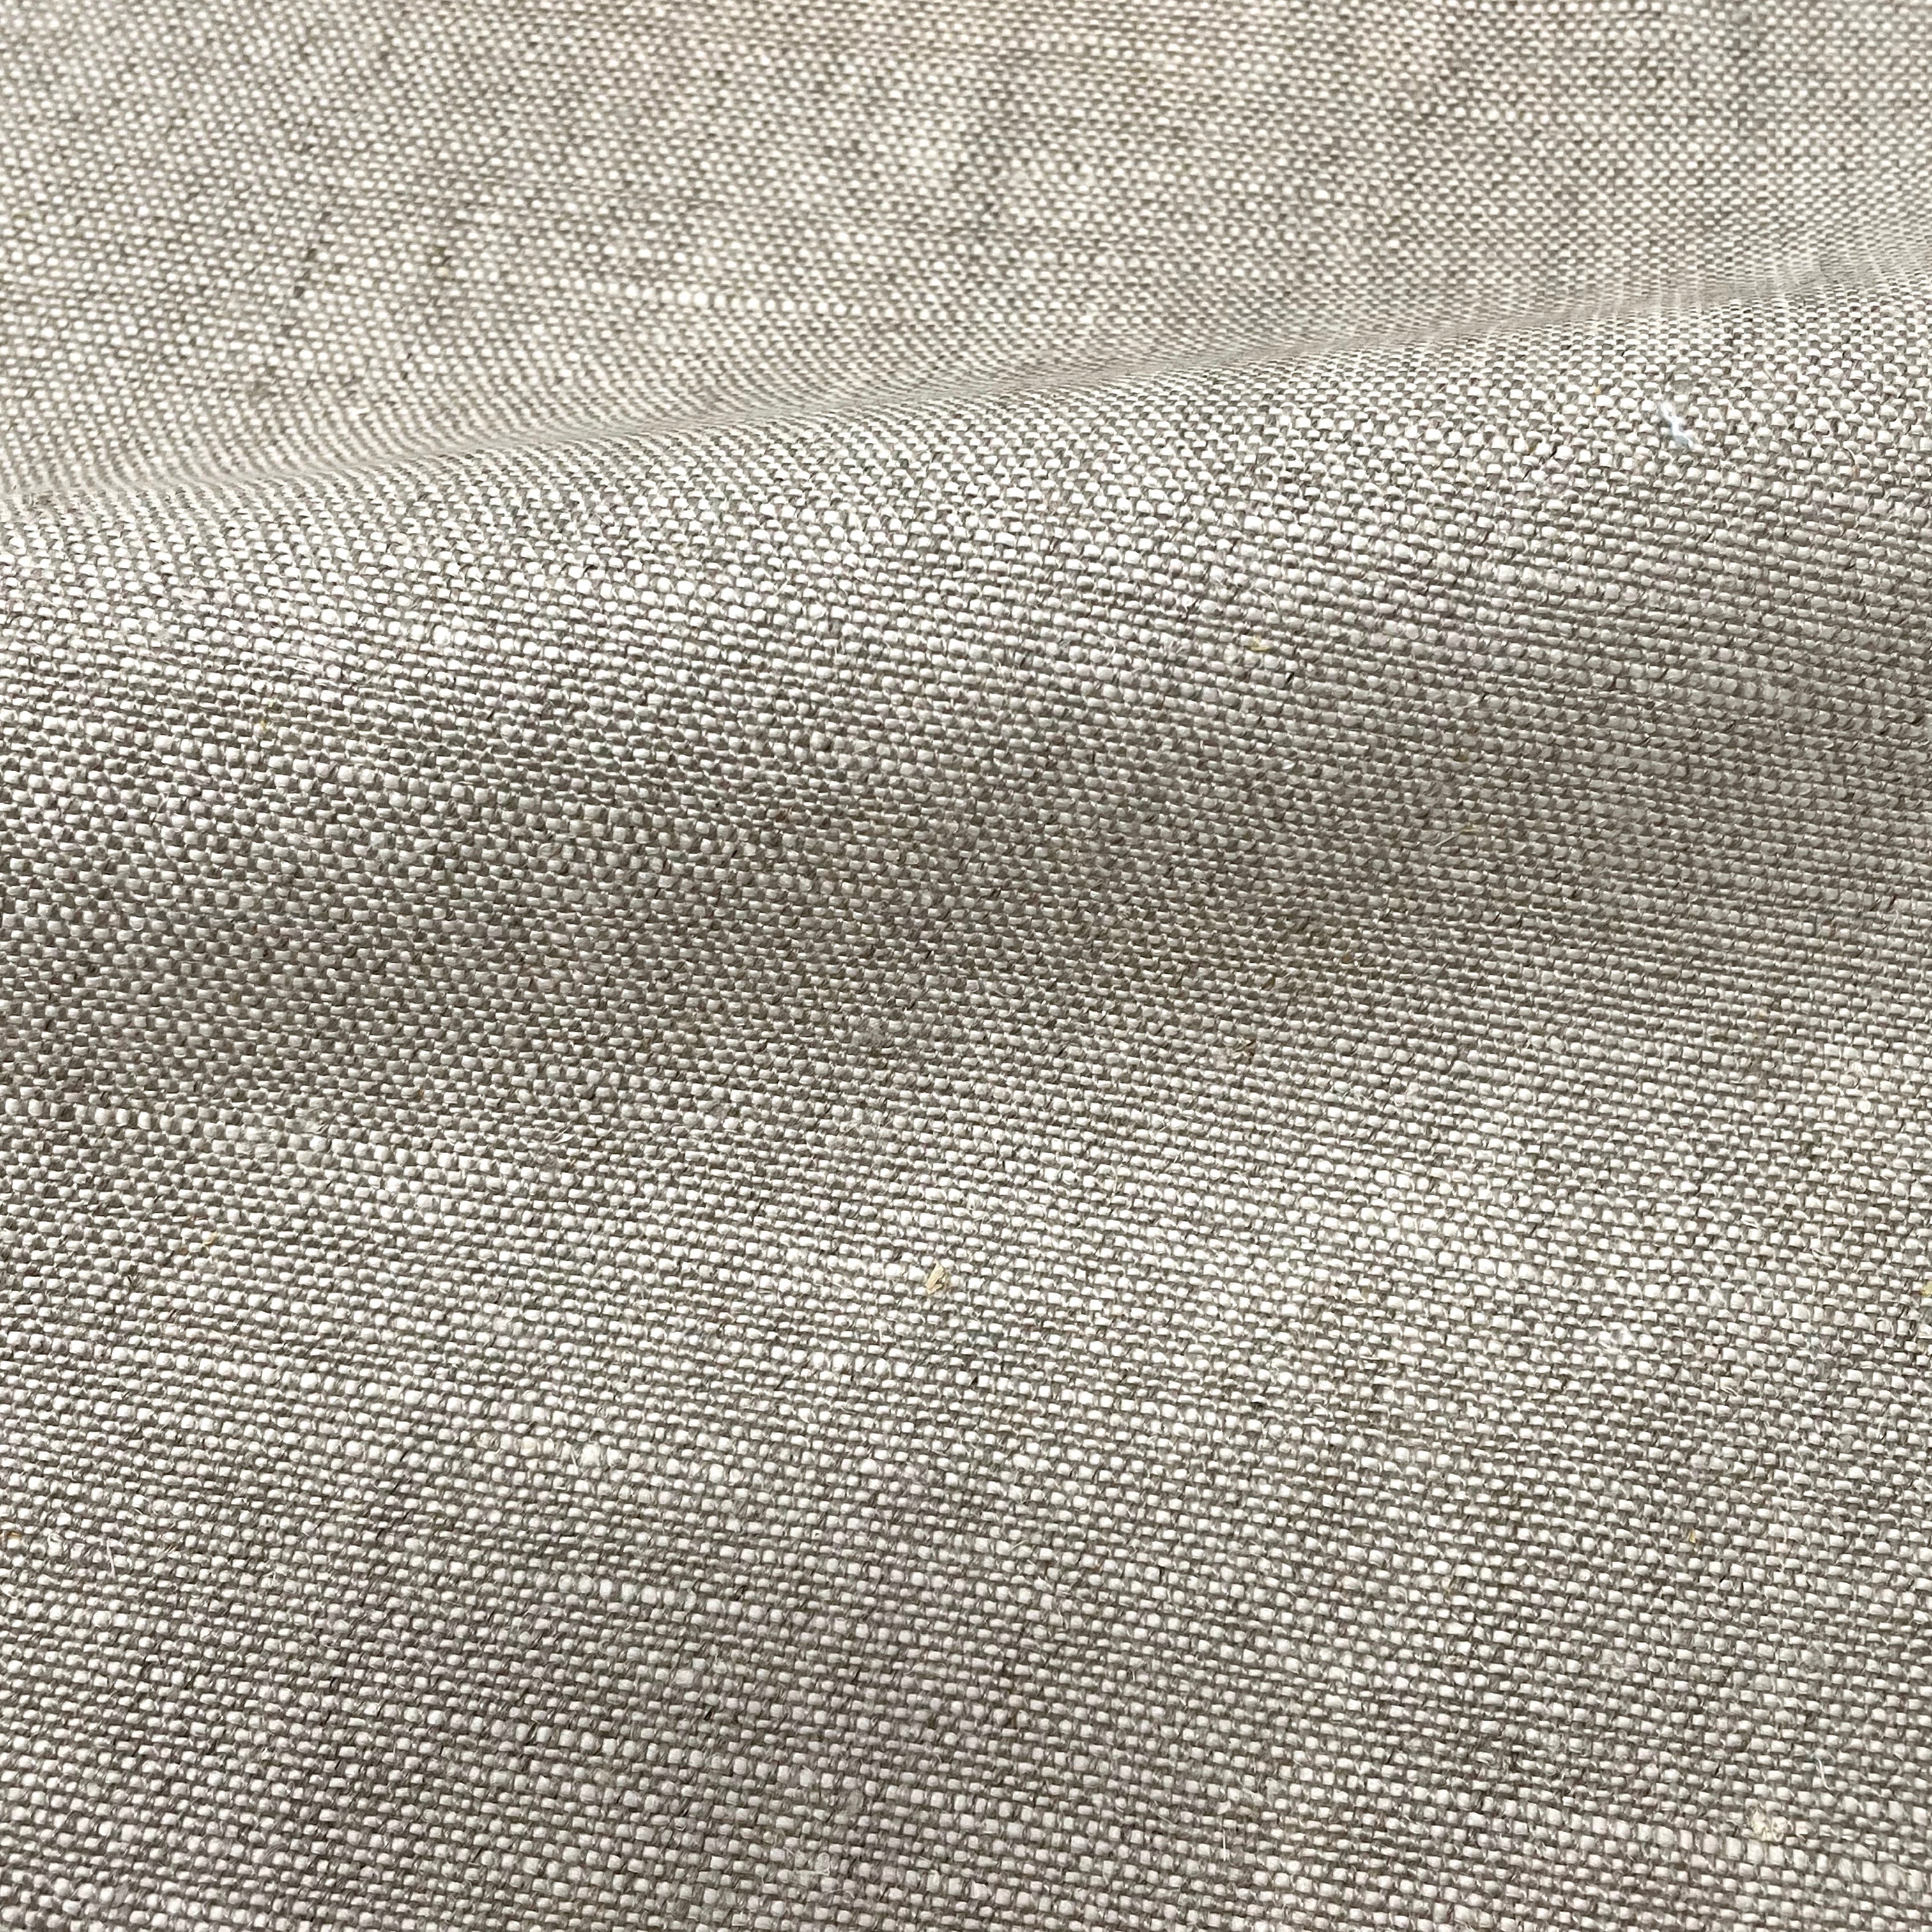 Belgian 100% Natural Linen Fabric By The Yard/CL1051